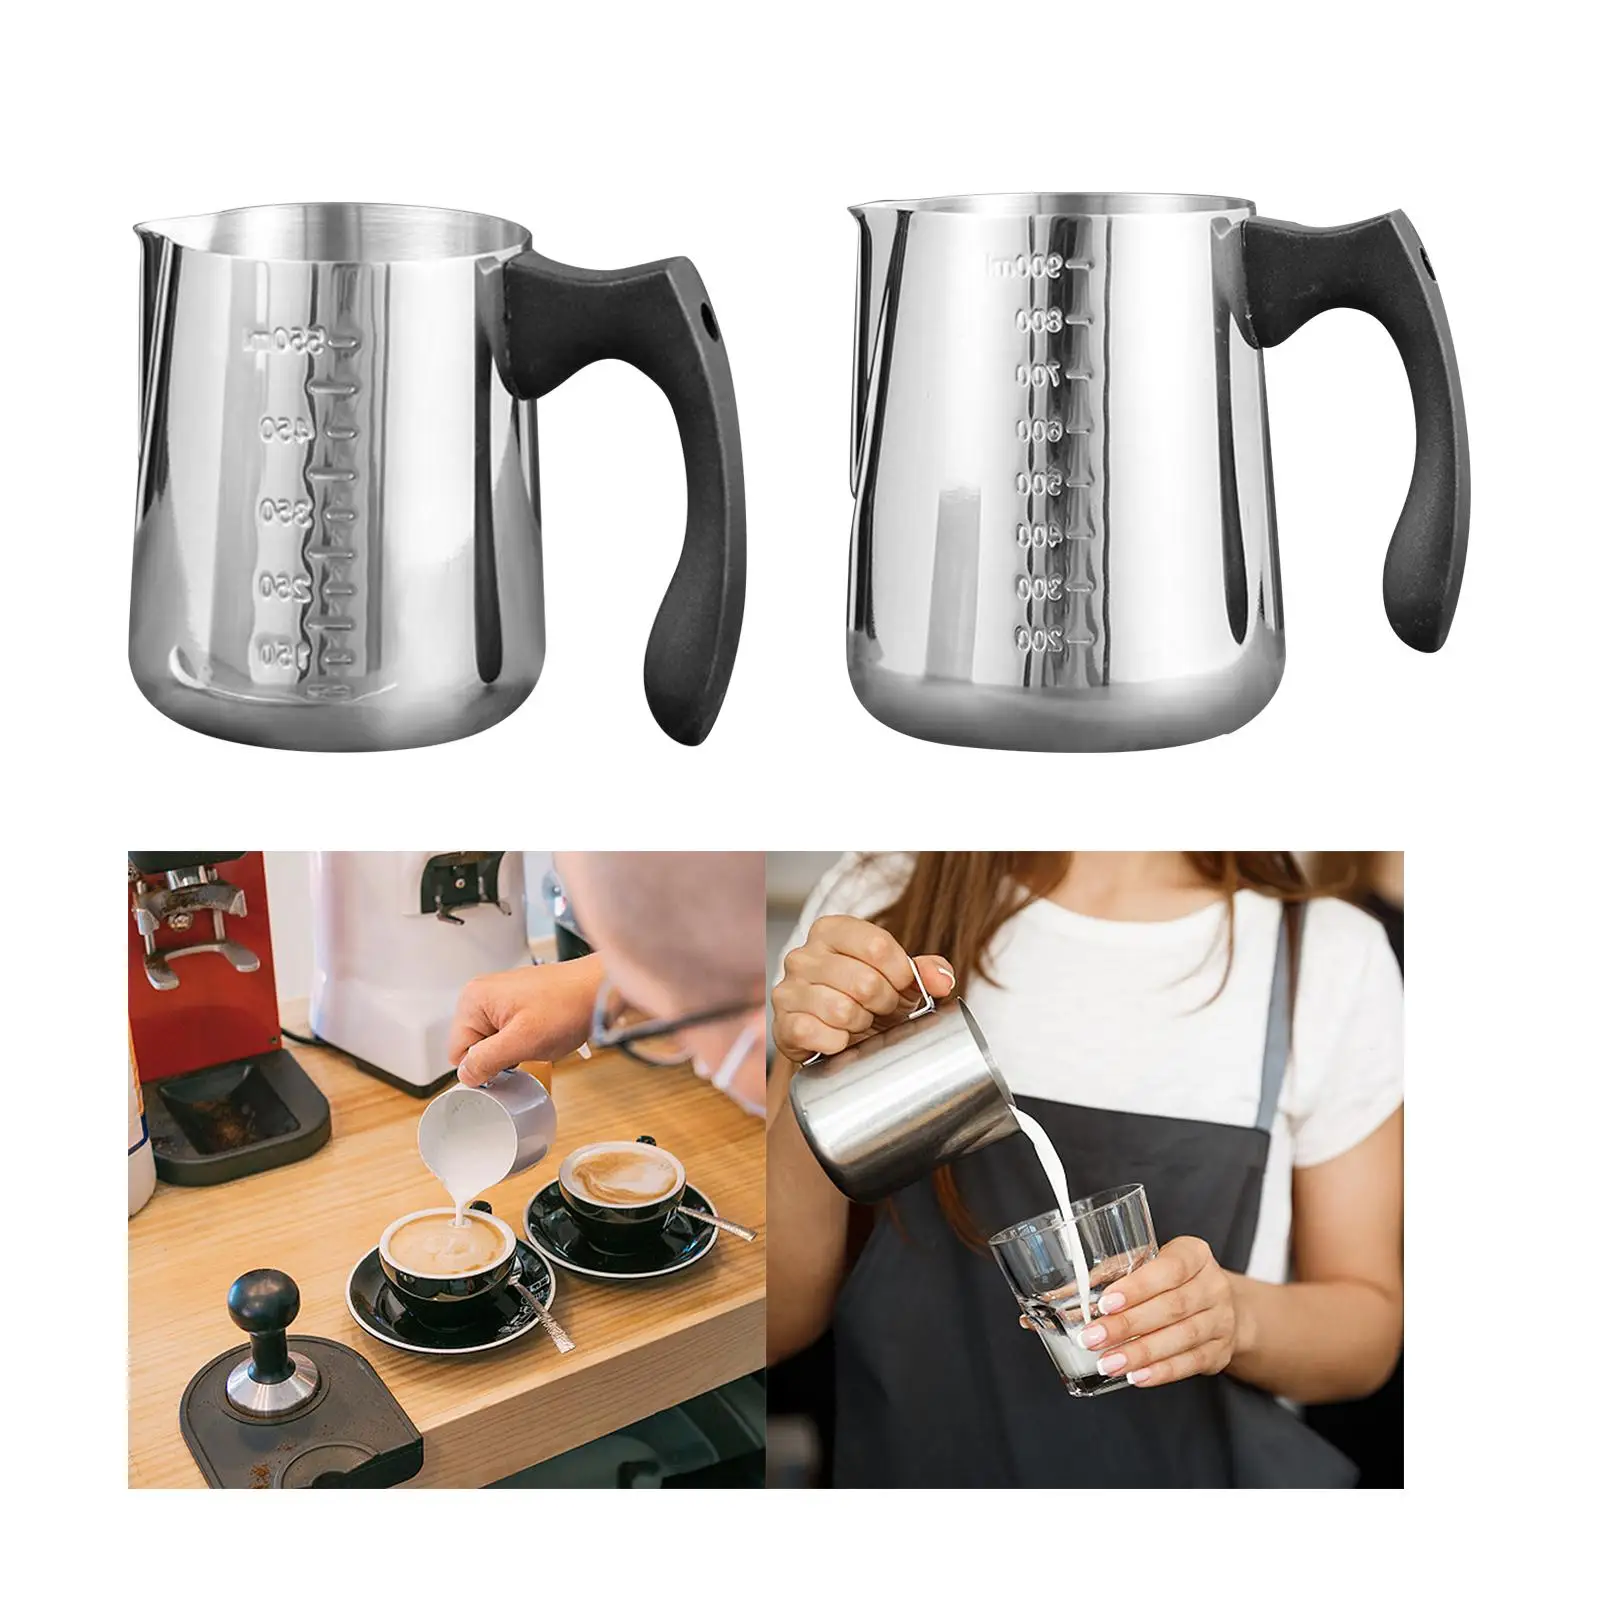 Multifunctional Milk Frothing Mug Espresso Steaming Cups Coffee Milk Frothing Jug Milk Jug Cup Coffeware for Party